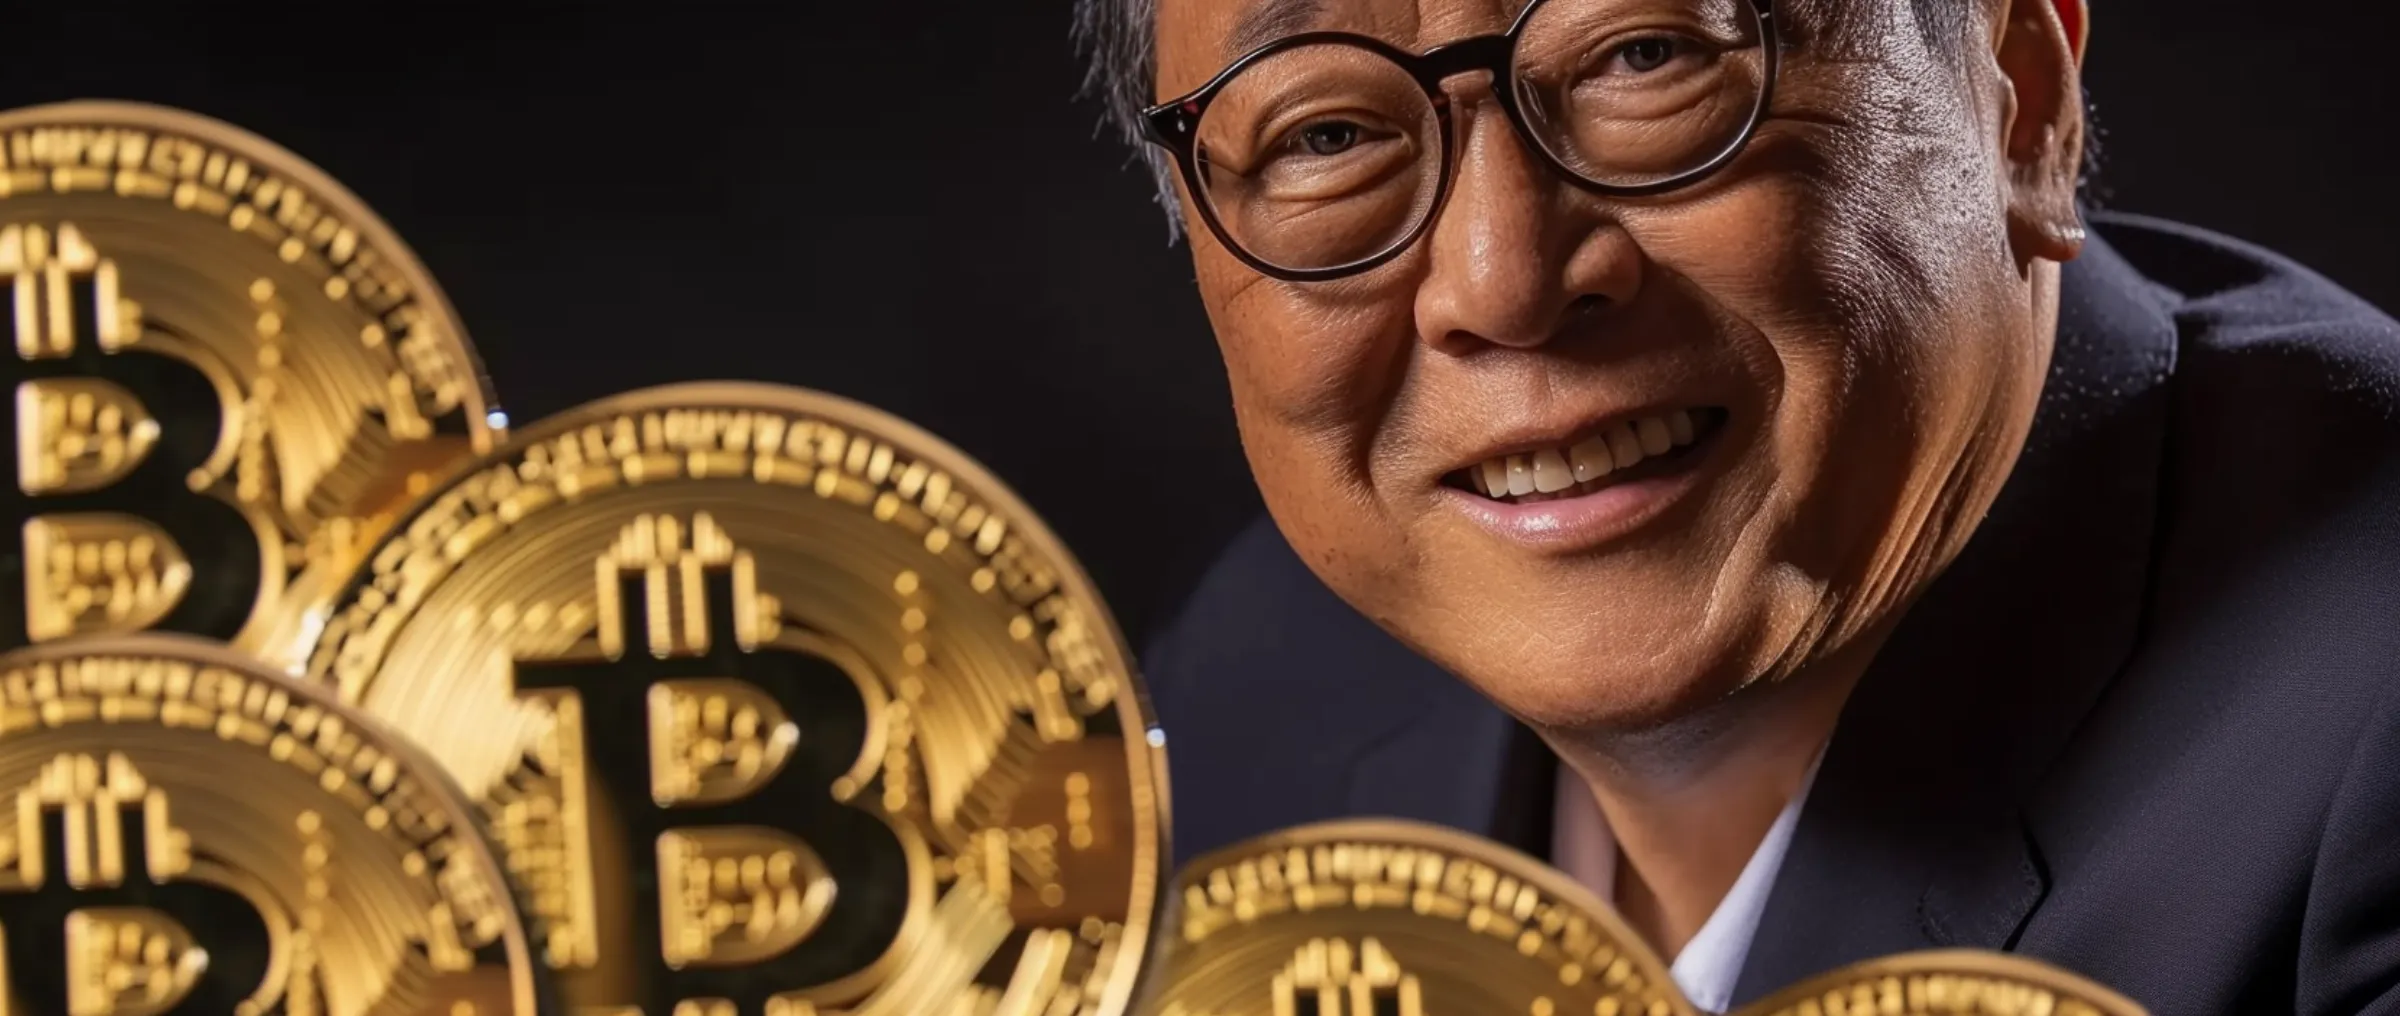 Robert Kiyosaki is concerned about the US national debt and advises buying Bitcoin